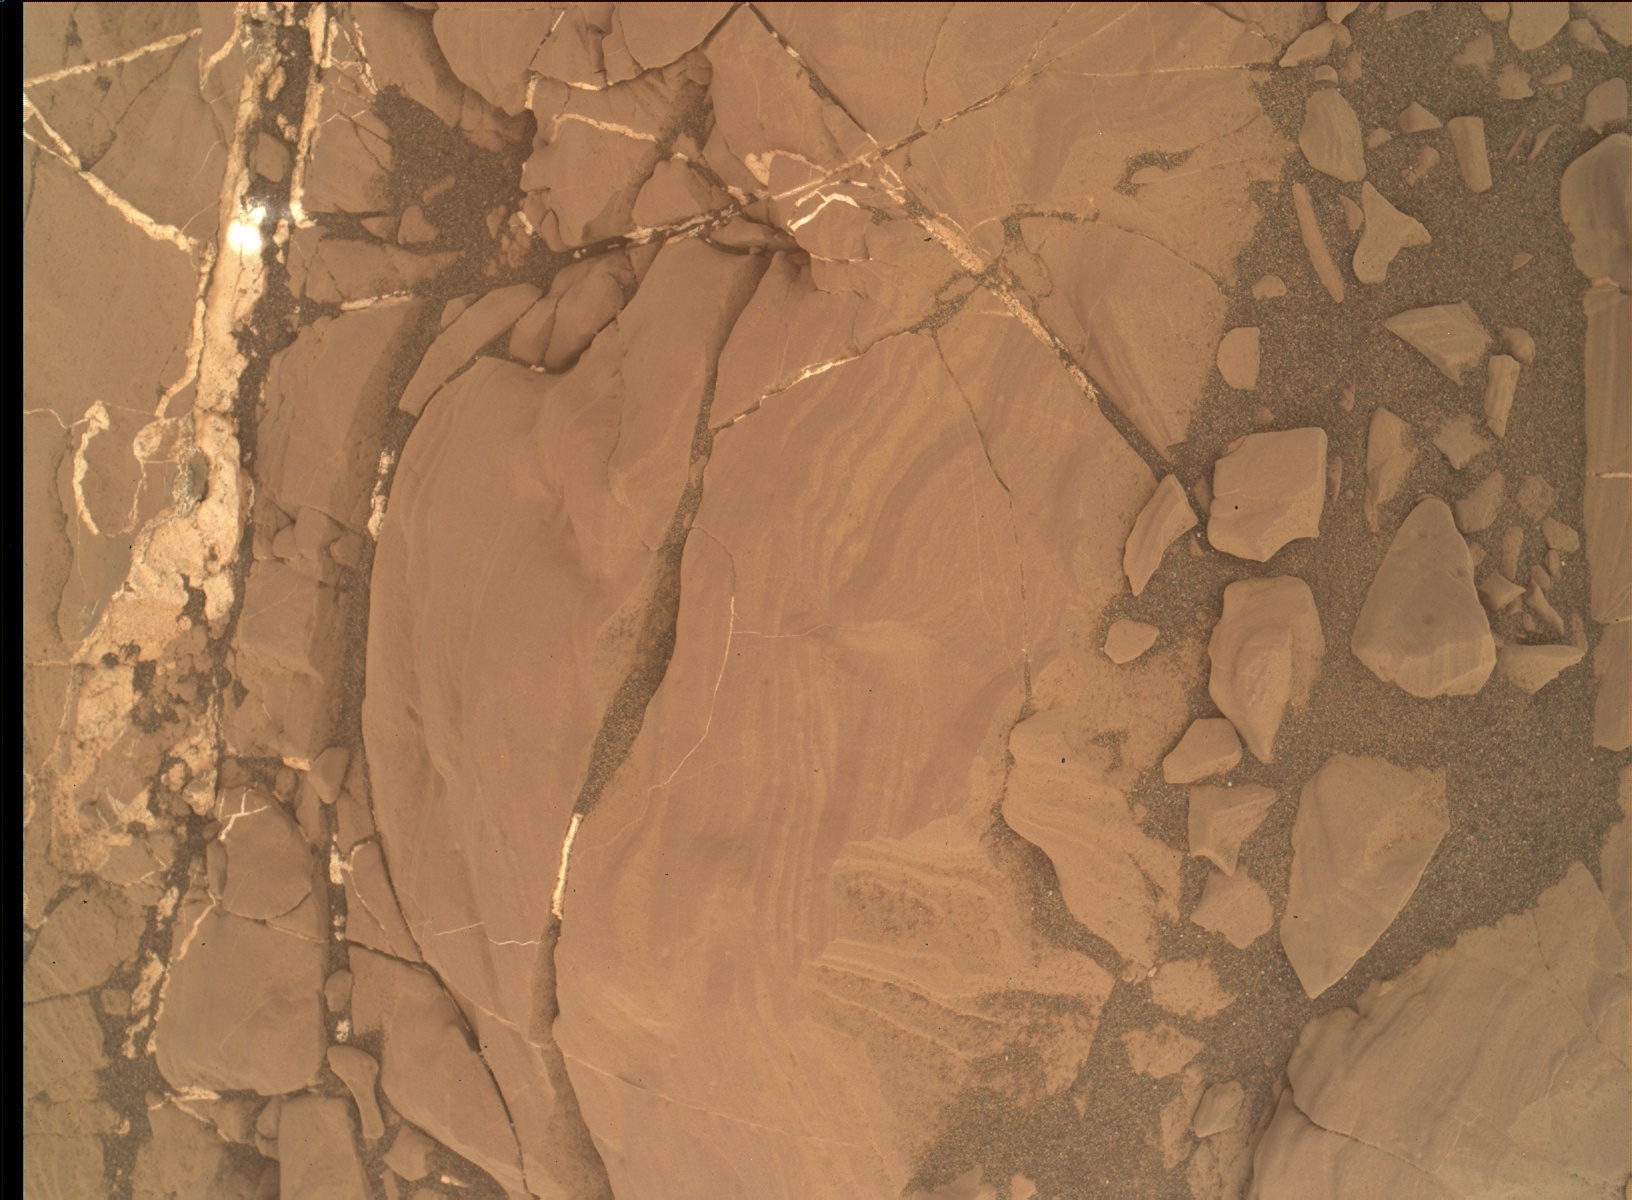 Nasa's Mars rover Curiosity acquired this image using its Mars Hand Lens Imager (MAHLI) on Sol 1811